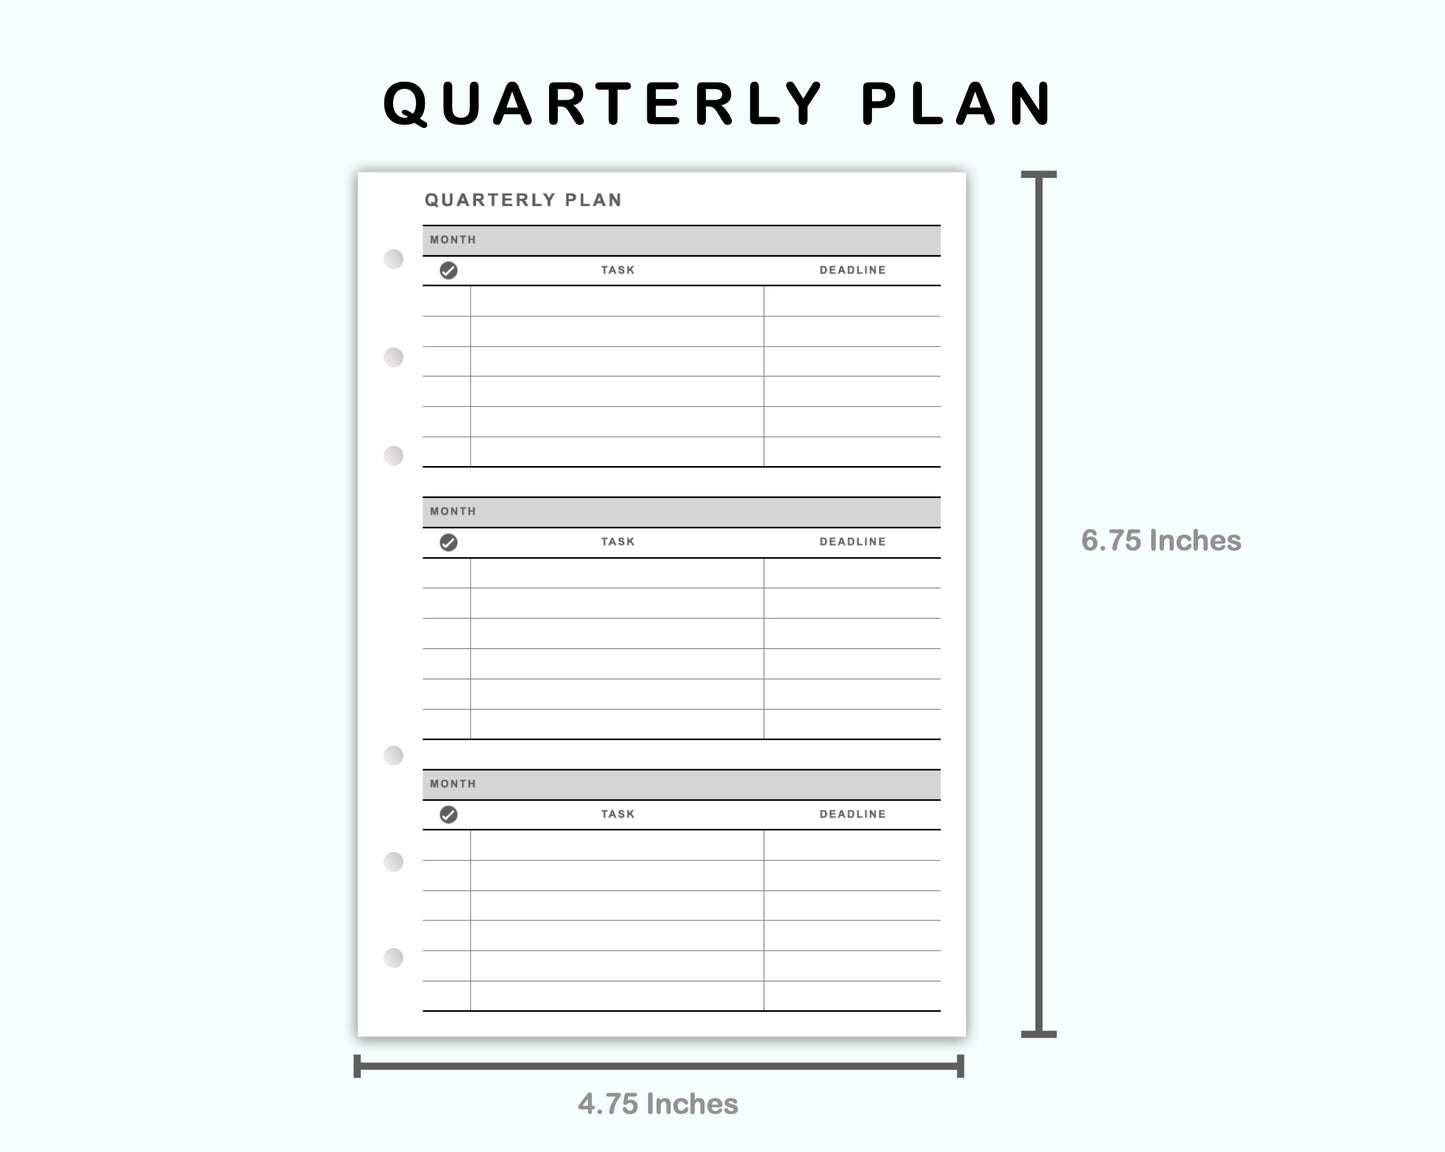 Personal Wide Inserts - Quarterly Plan